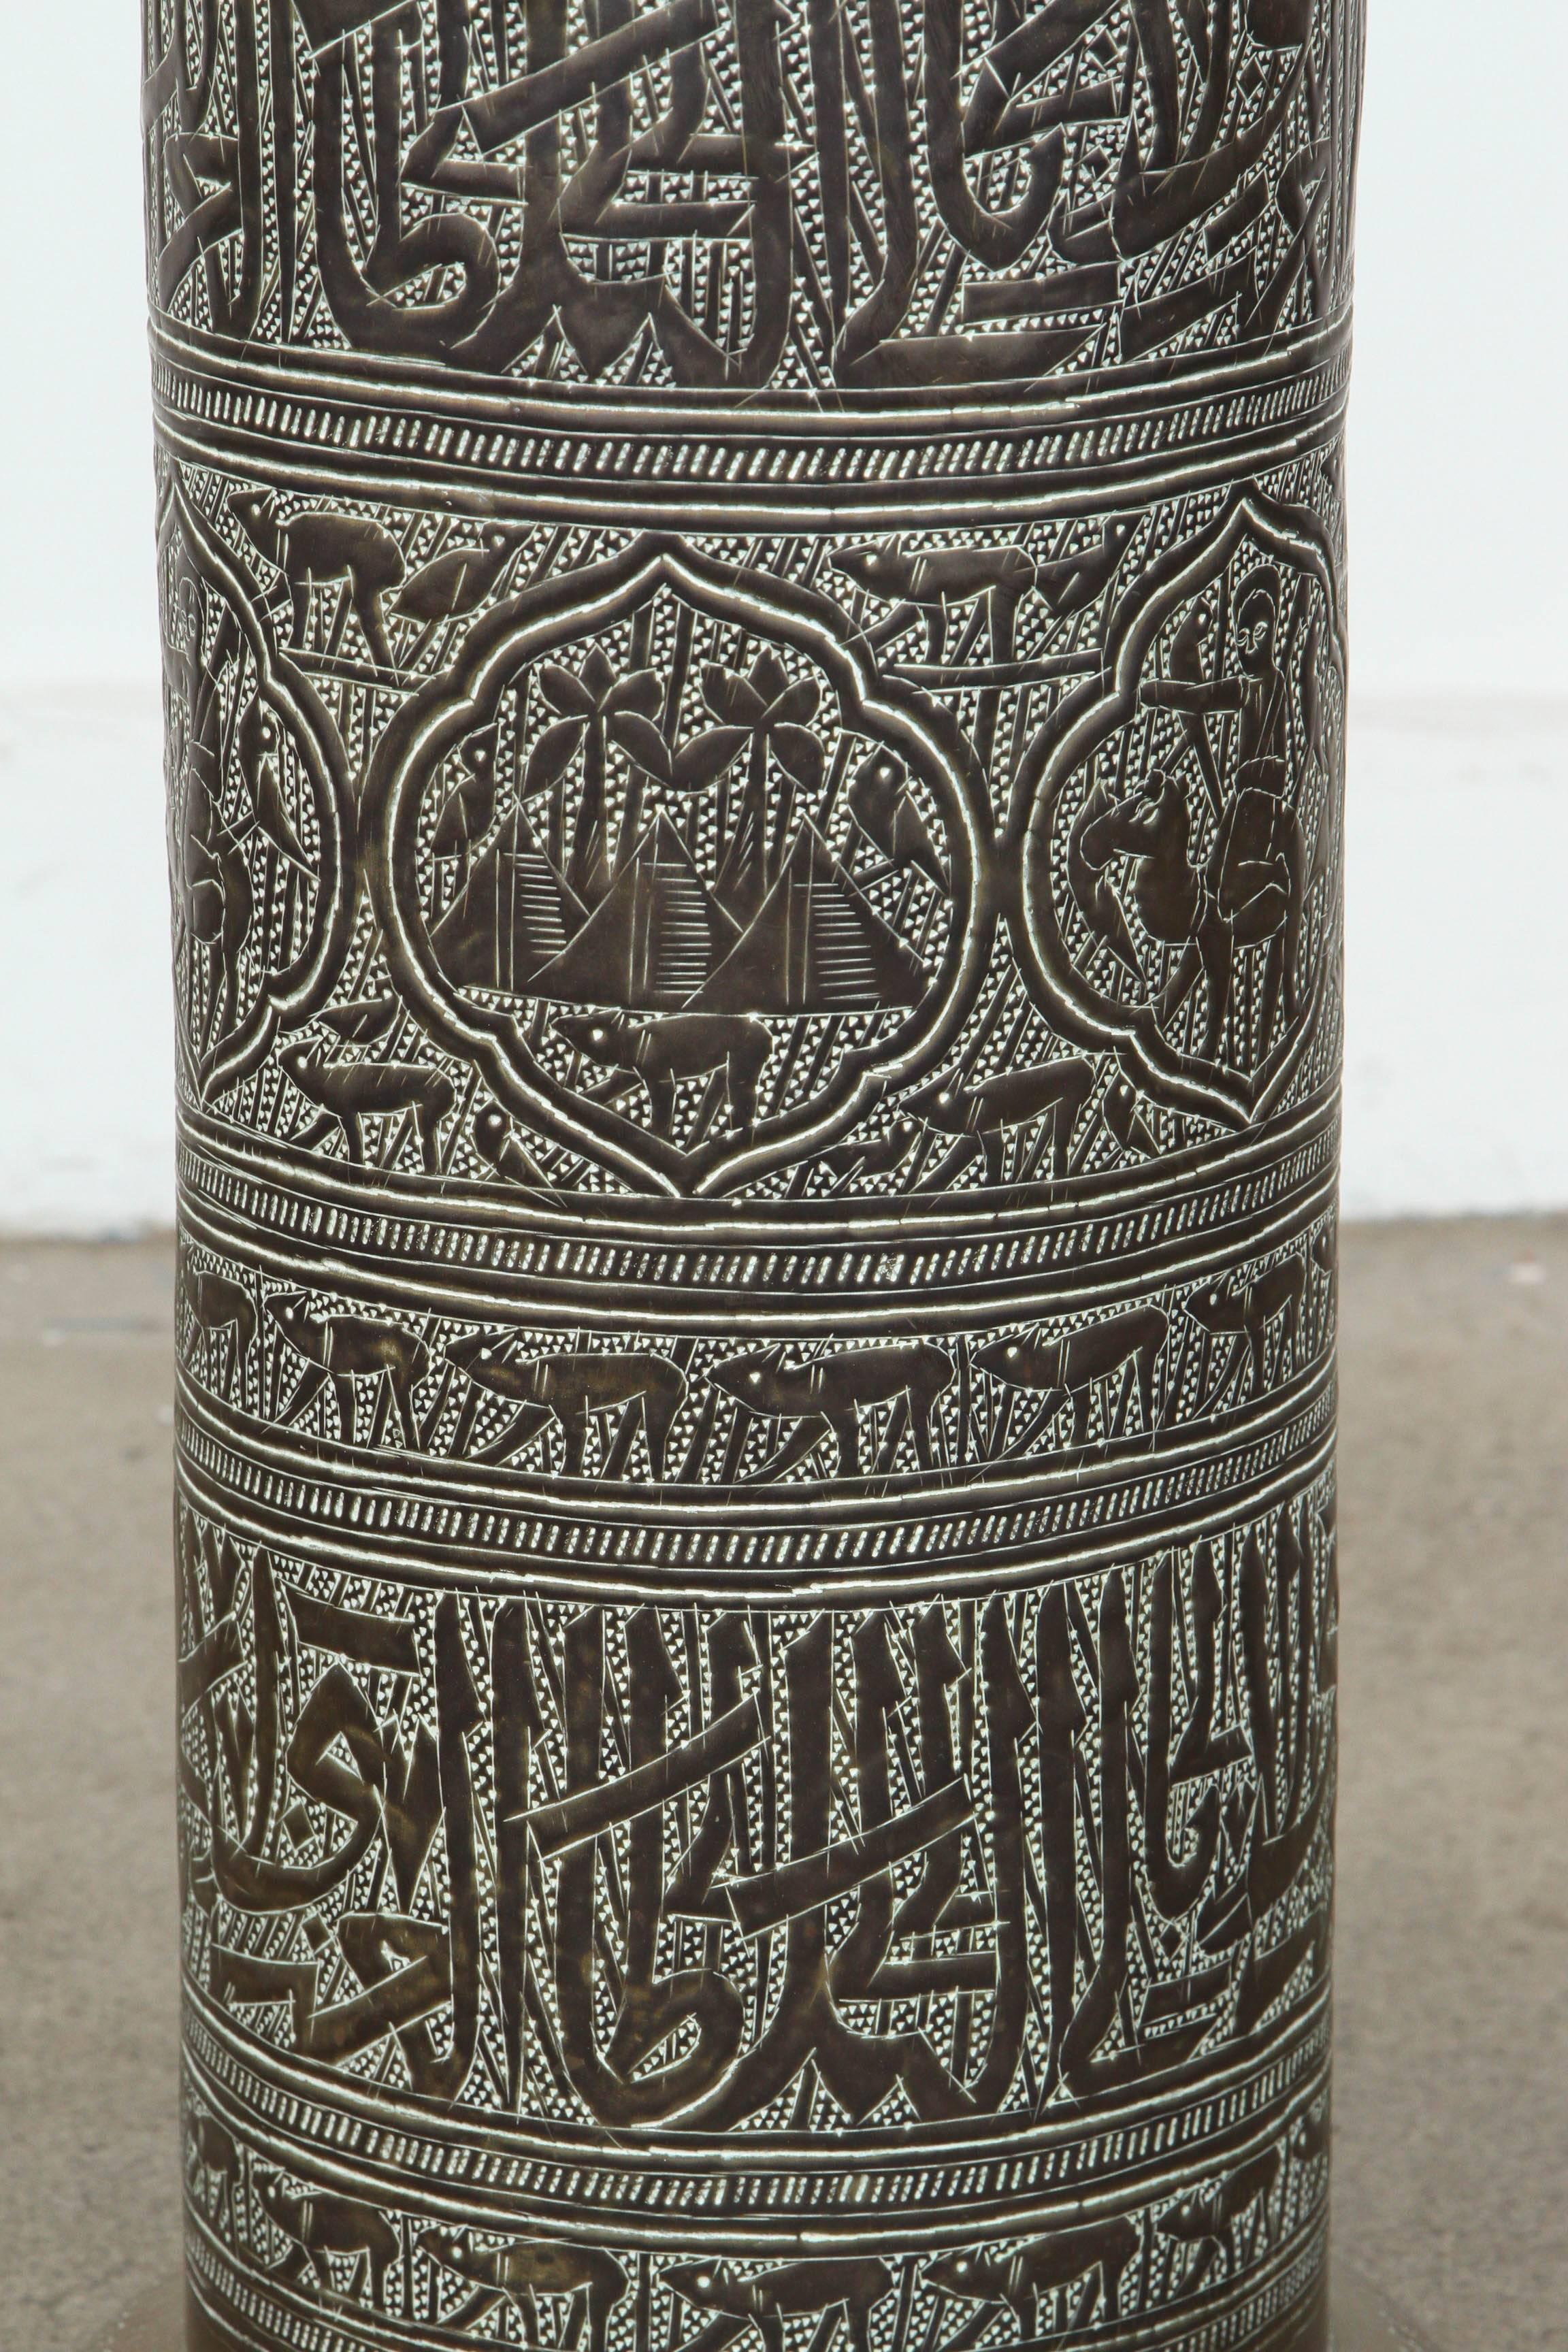 Hammered Brass Umbrella Stand with Islamic Calligraphy Writing